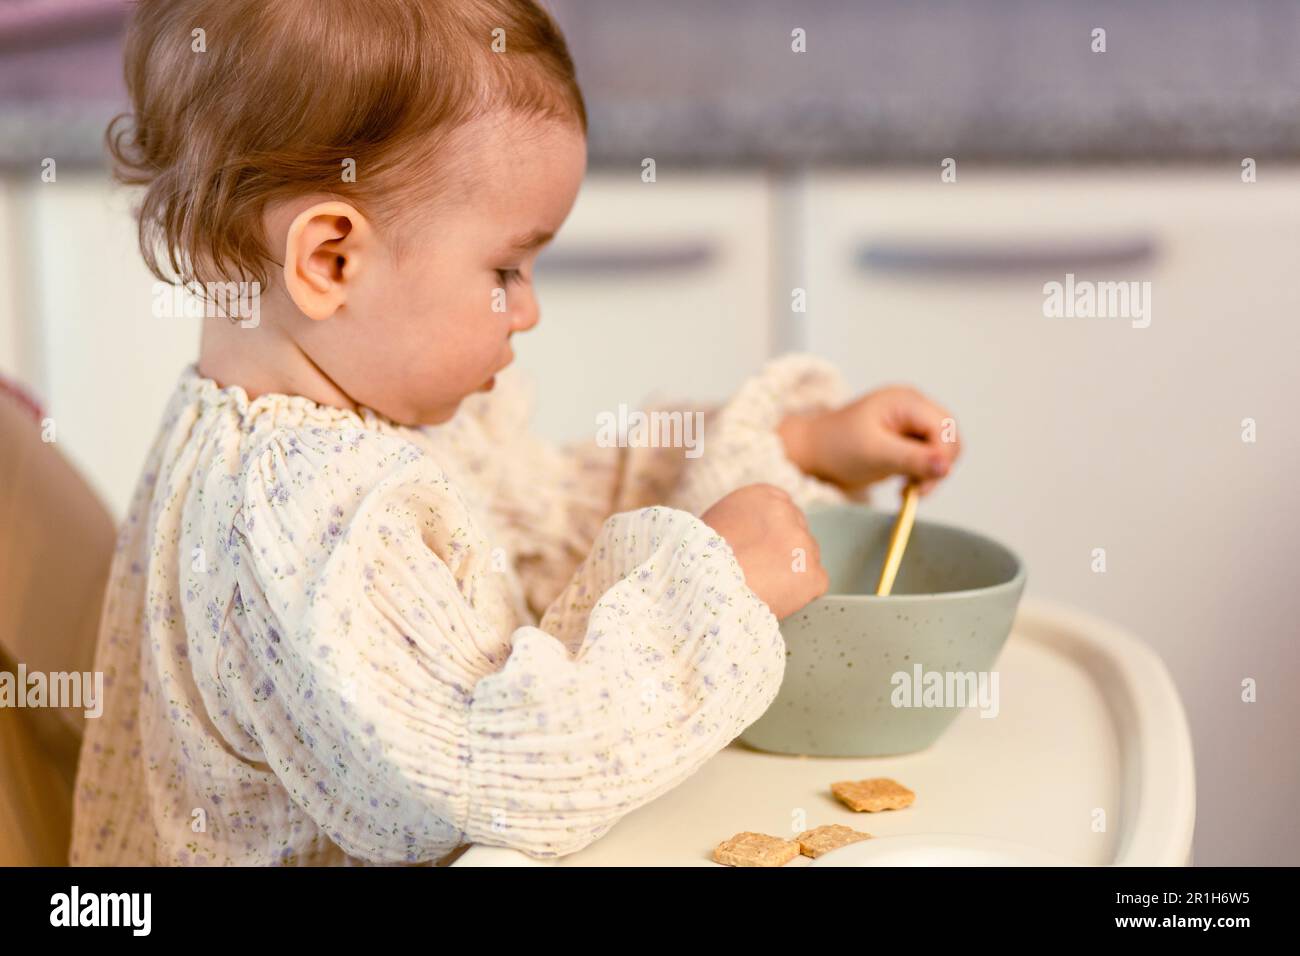 Little baby girl sitting in a highchair eating by herself with a spoon Stock Photo